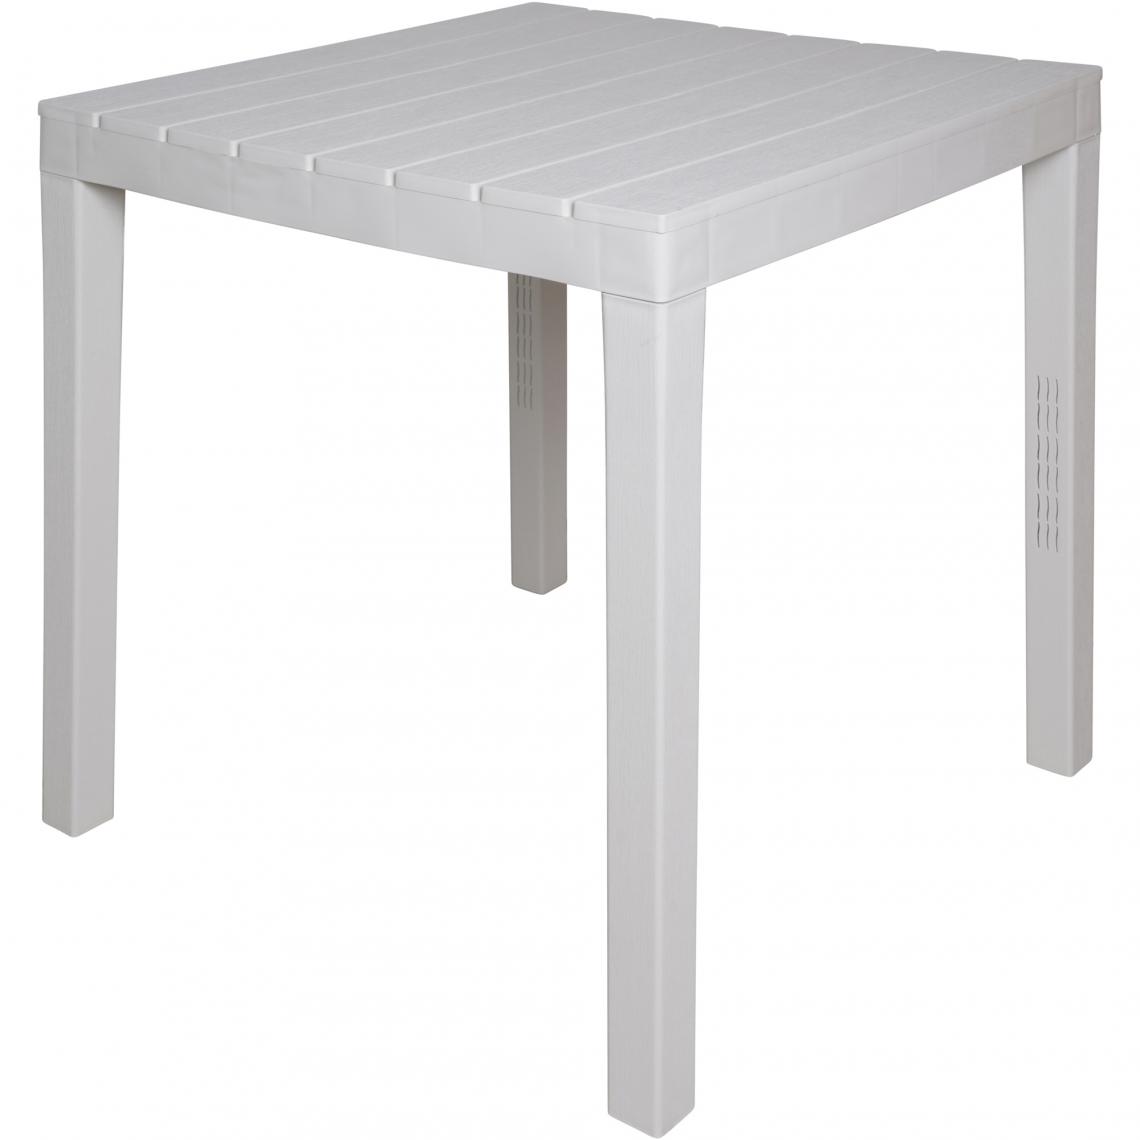 Alter - Table carrée modulable, Made in Italy, 78 x78x72 cm, couleur Blanc - Tables à manger